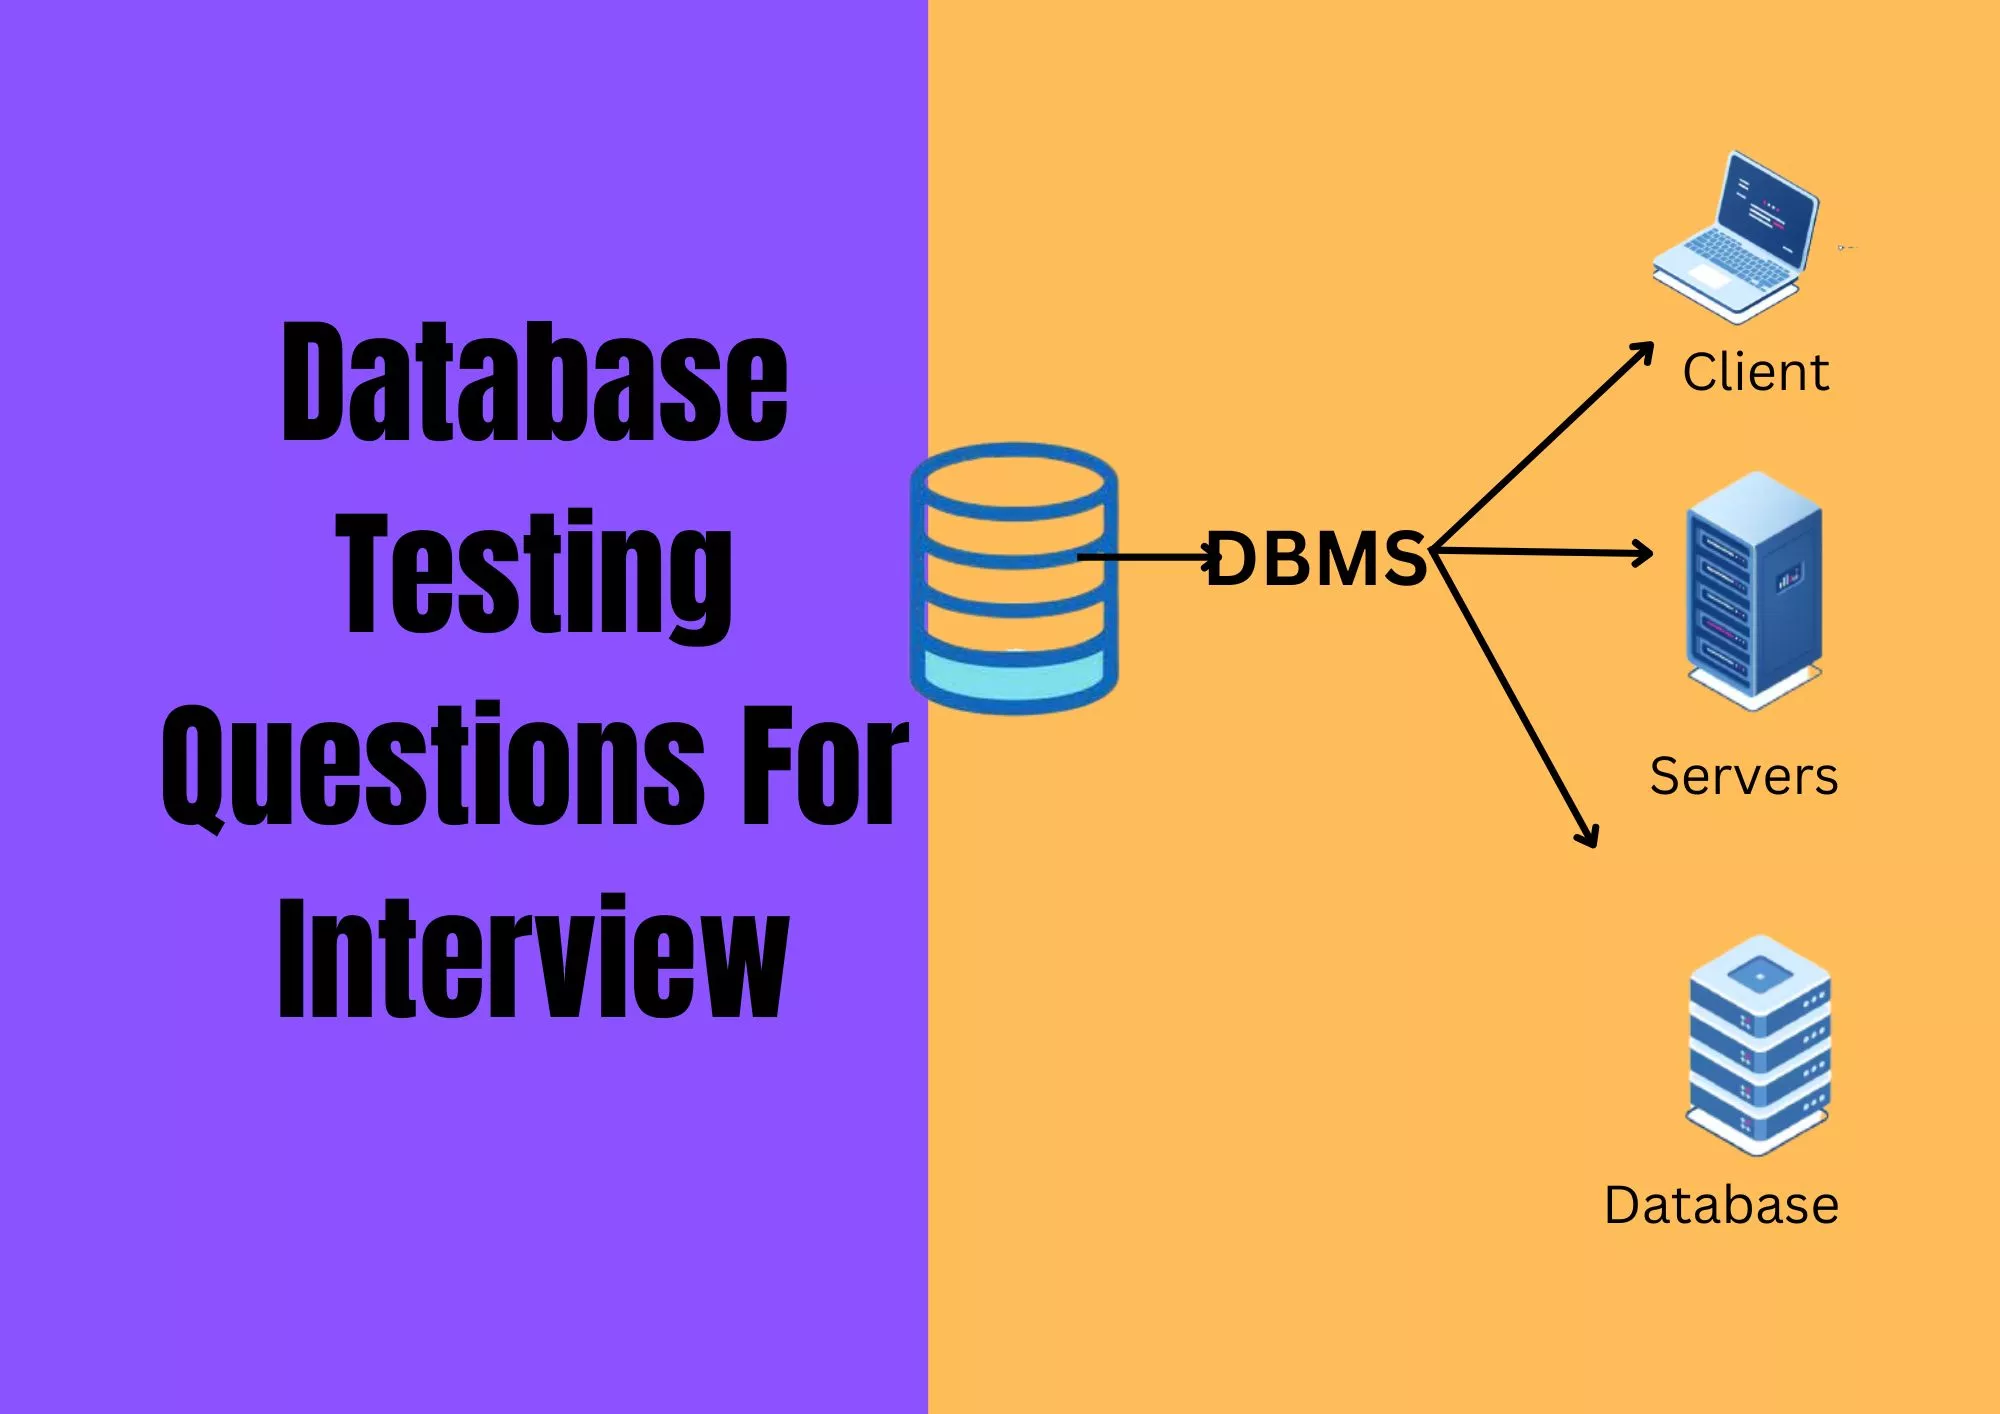 Database Testing questions for interview